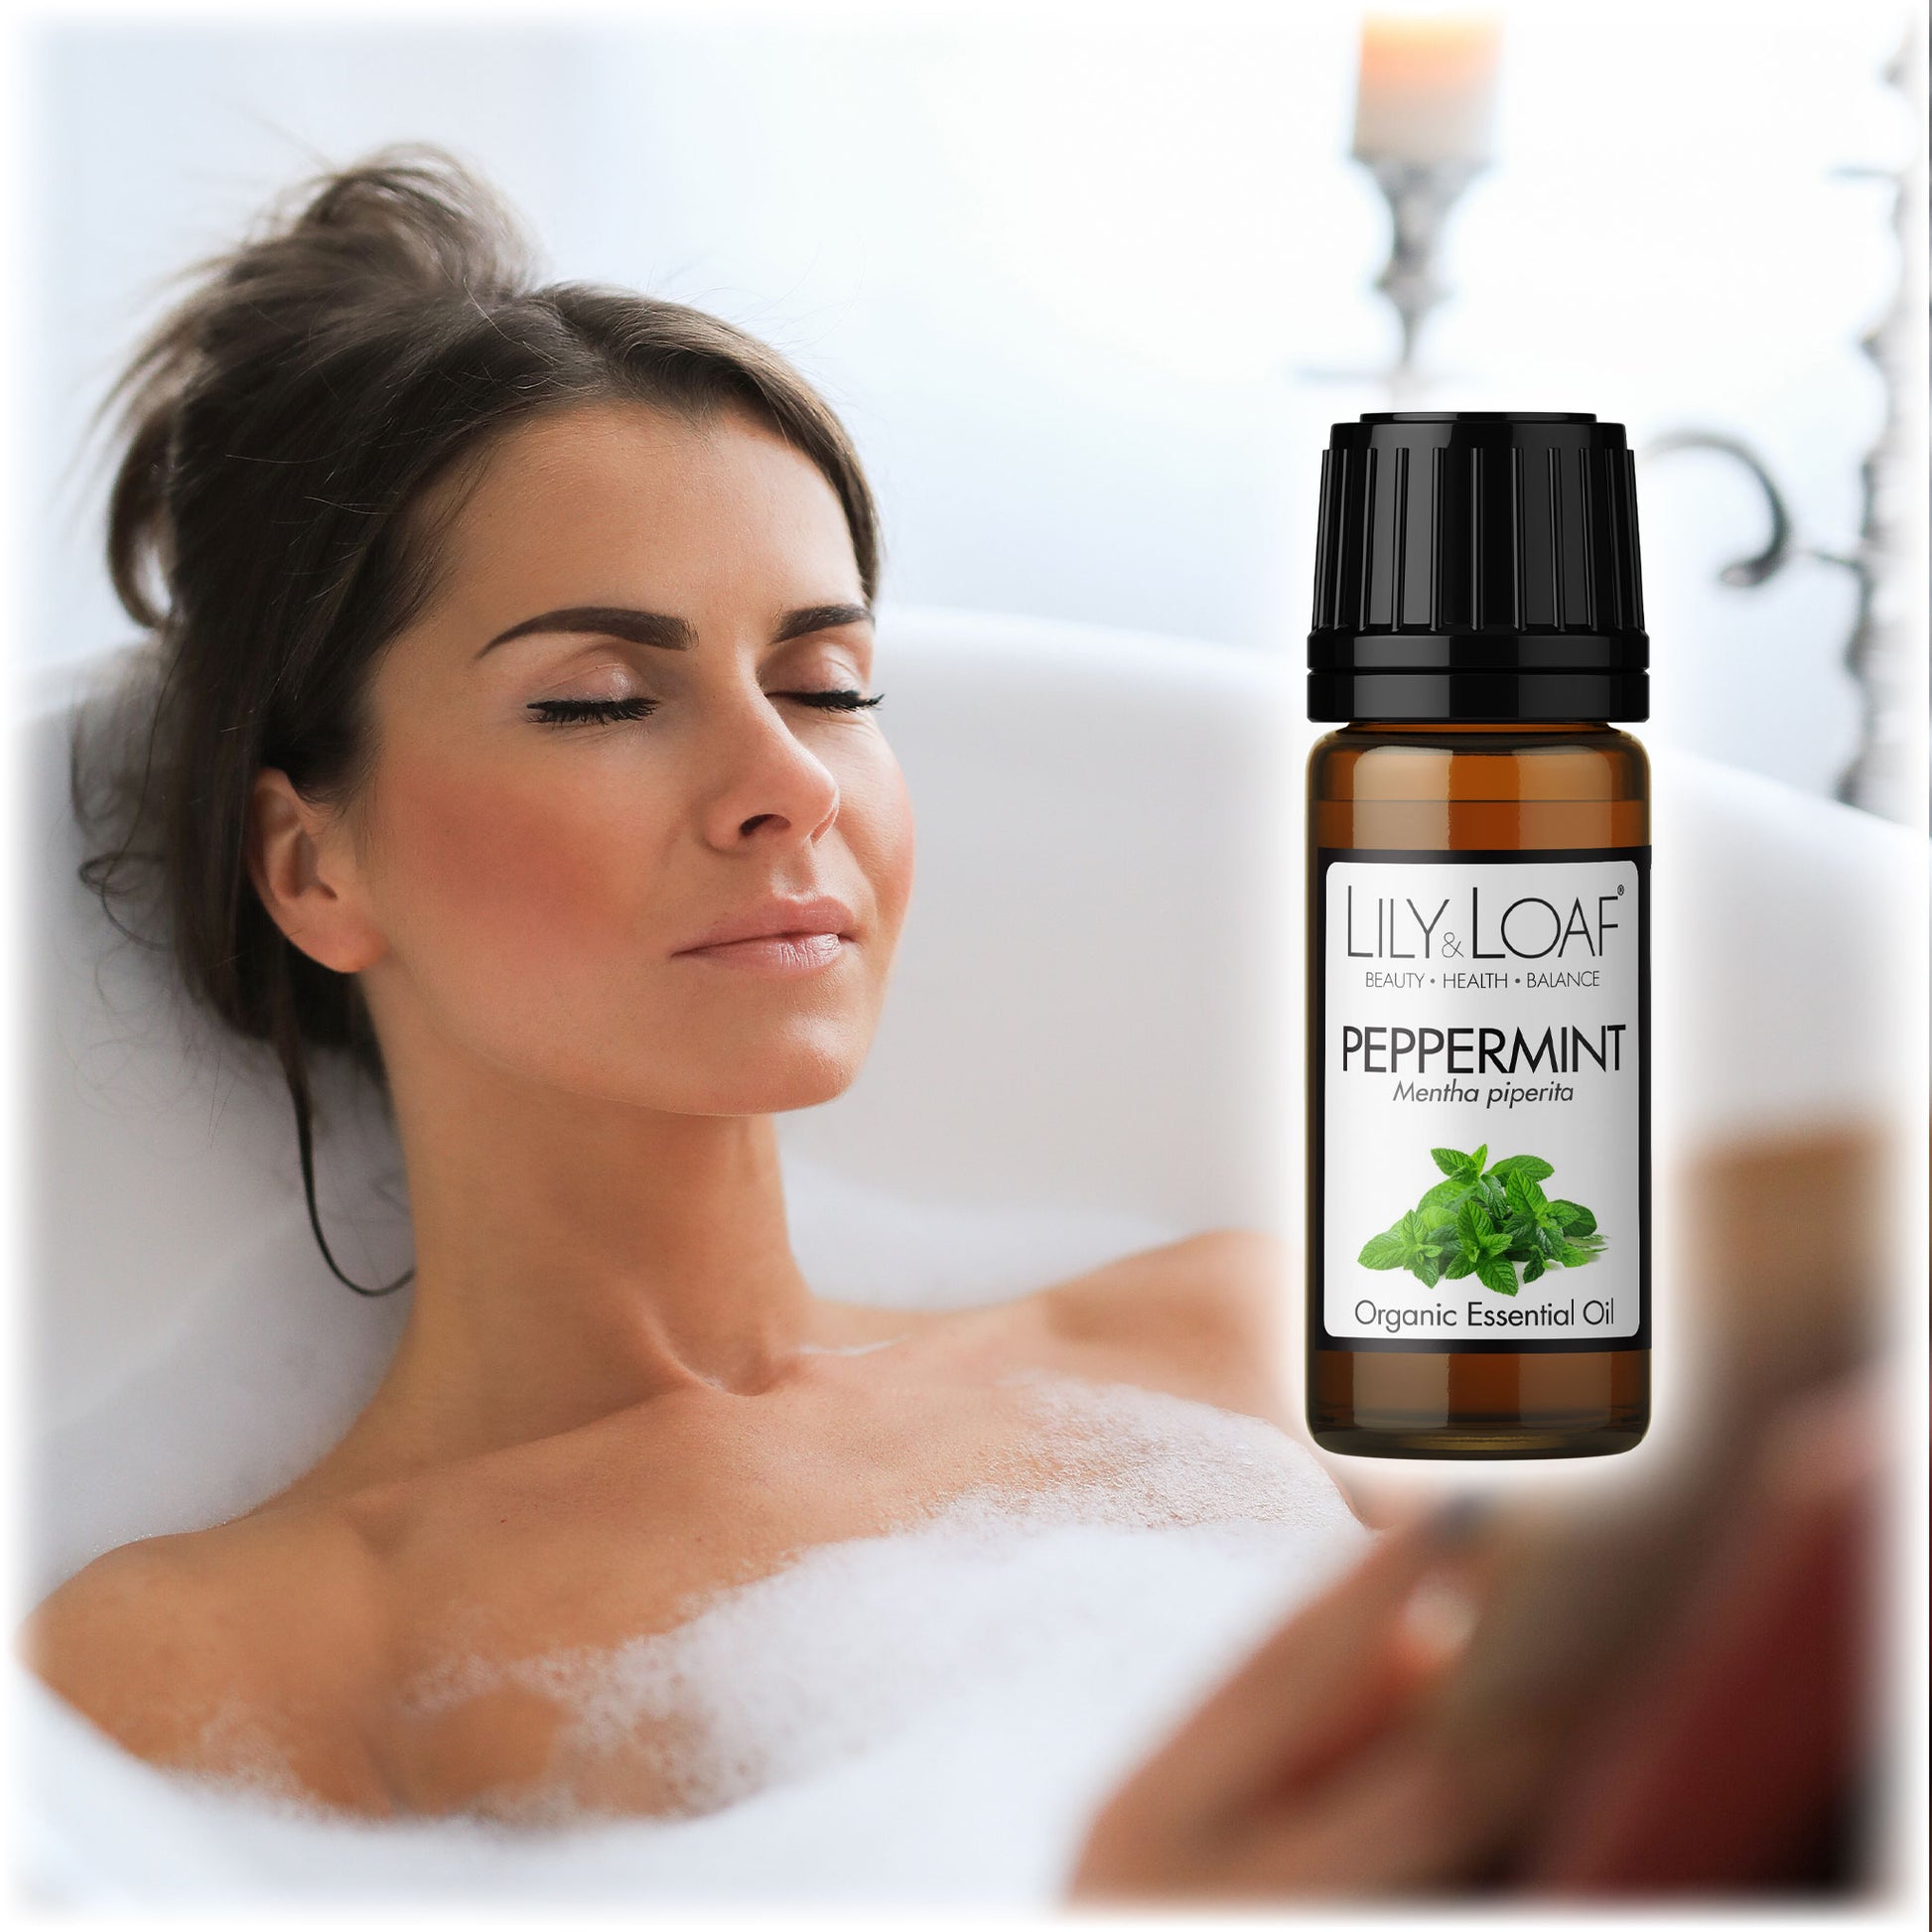 Woman relaxing in a bubble bath with a bottle of Lily & Loaf Peppermint essential oil in the foreground. Promotes relaxation and rejuvenation.